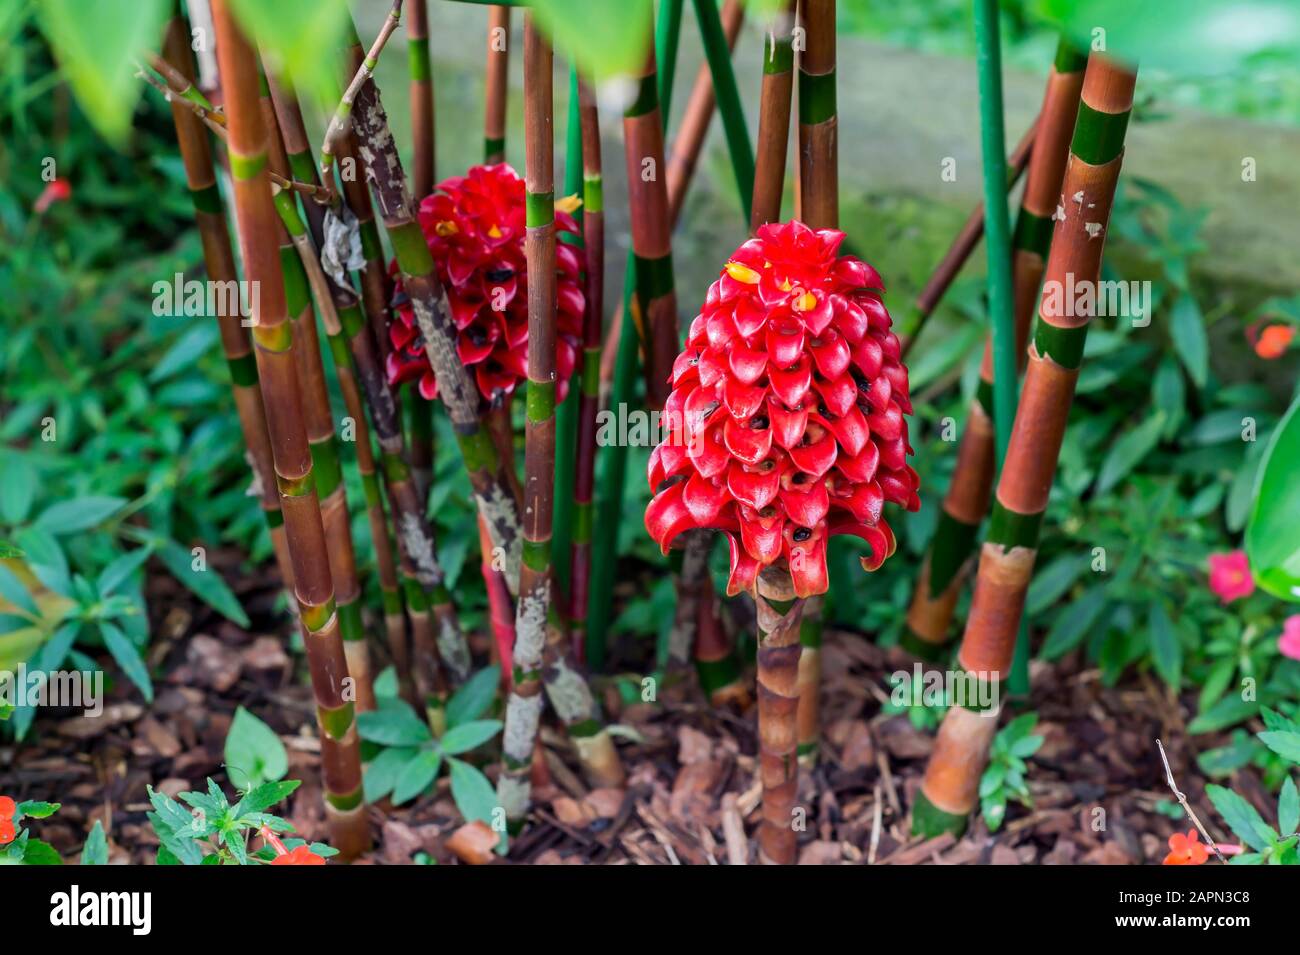 The flower is red with seeds from the inflorescence of the costus family, grown in the greenhouse. Latin name Costaceae. Stock Photo